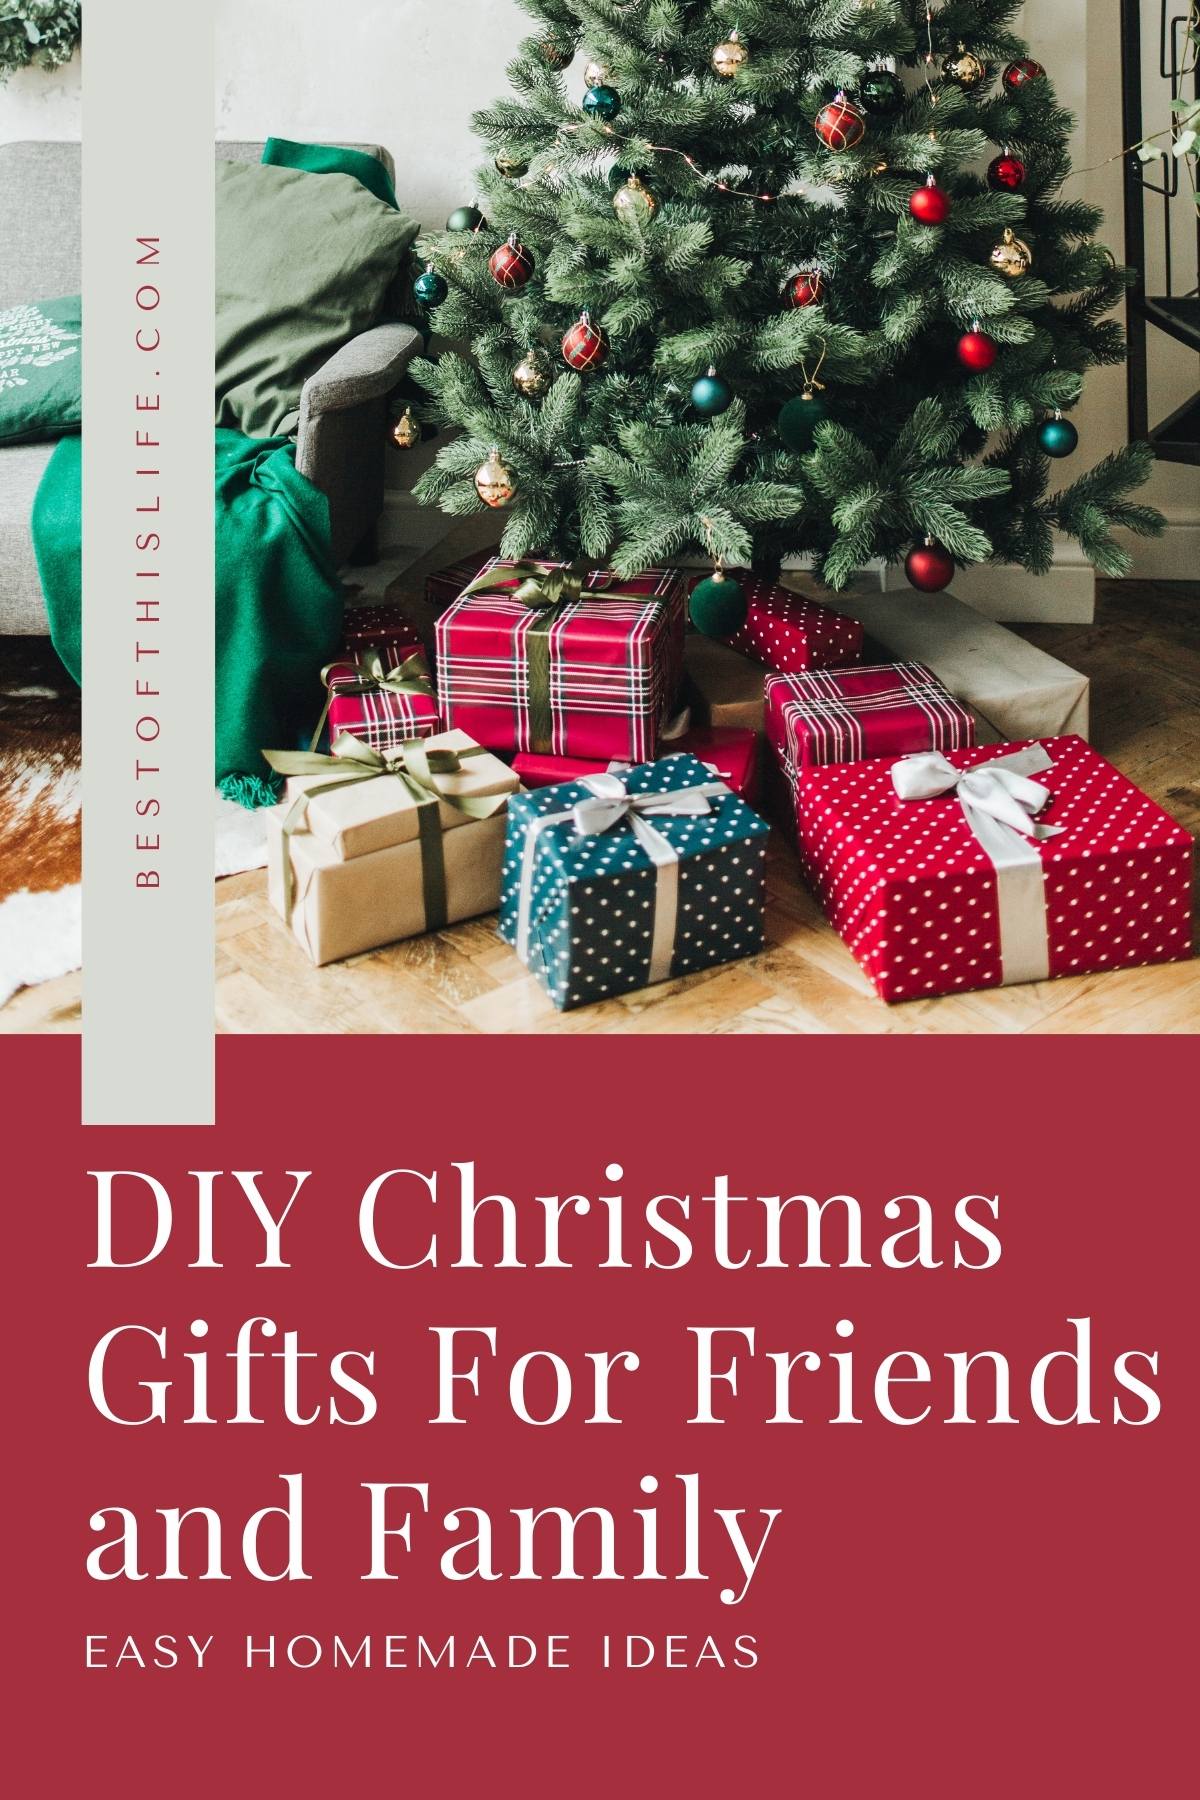 15 Easy Diy Christmas Gifts For Friends